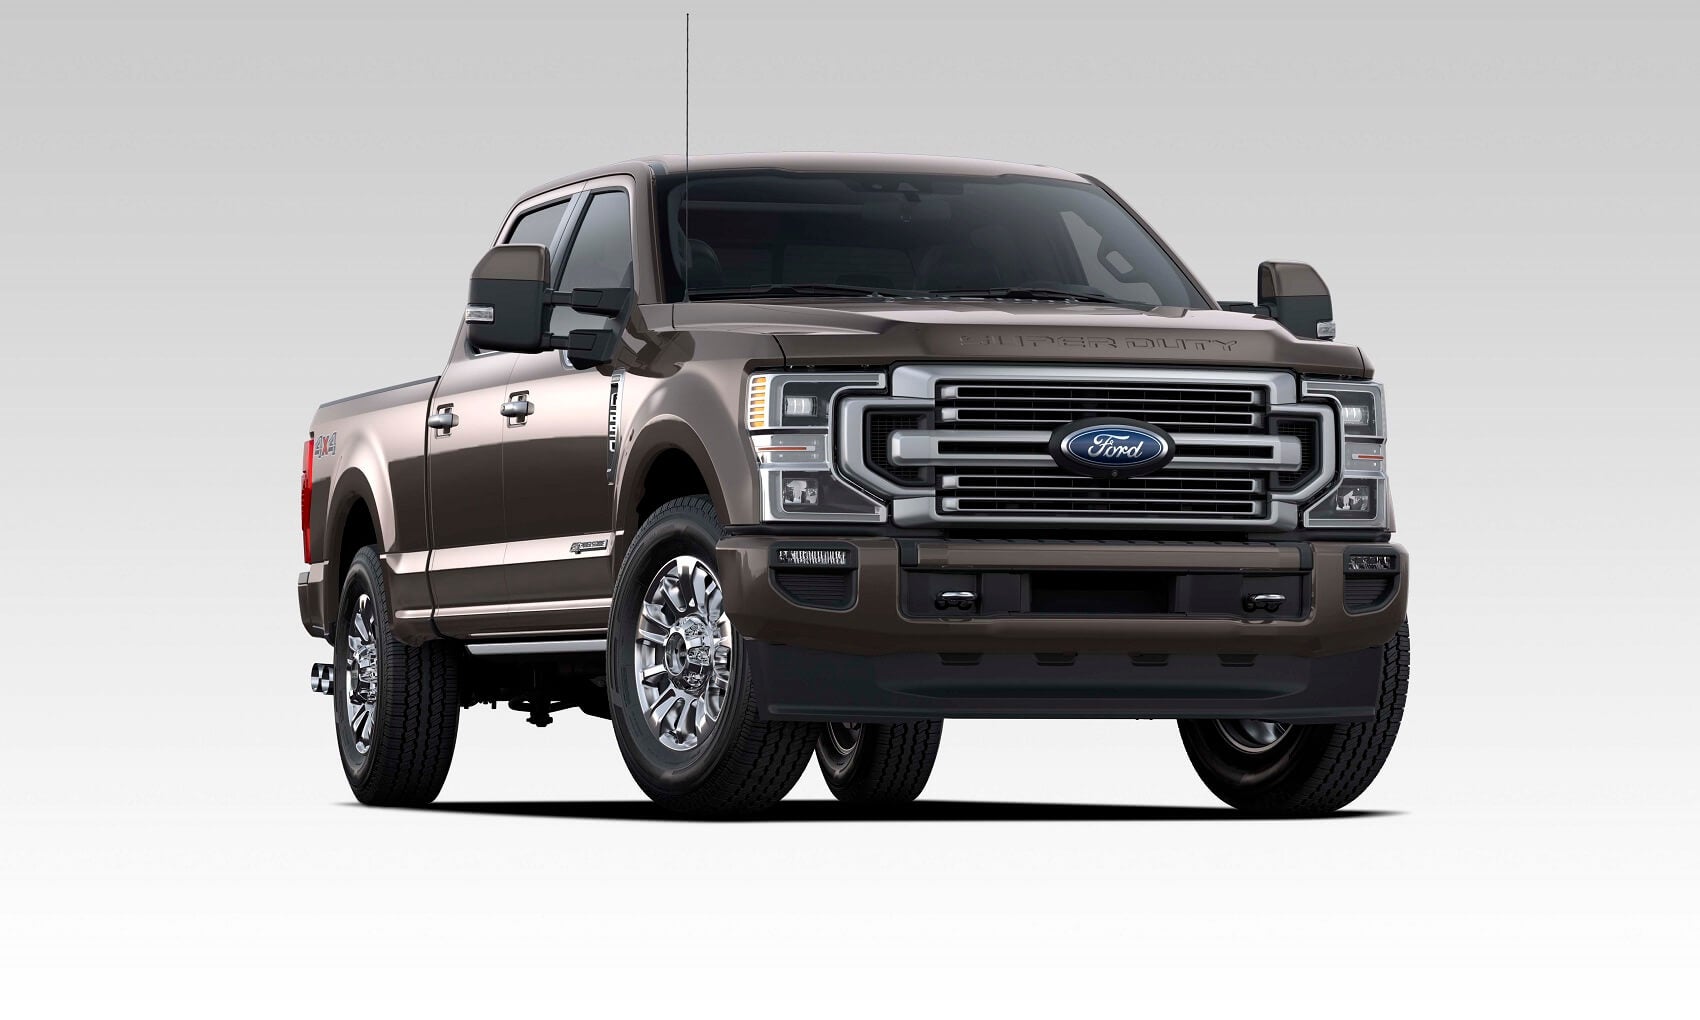 New Brown 2021 Ford Super Duty F-250 against a grey and white gradient background.